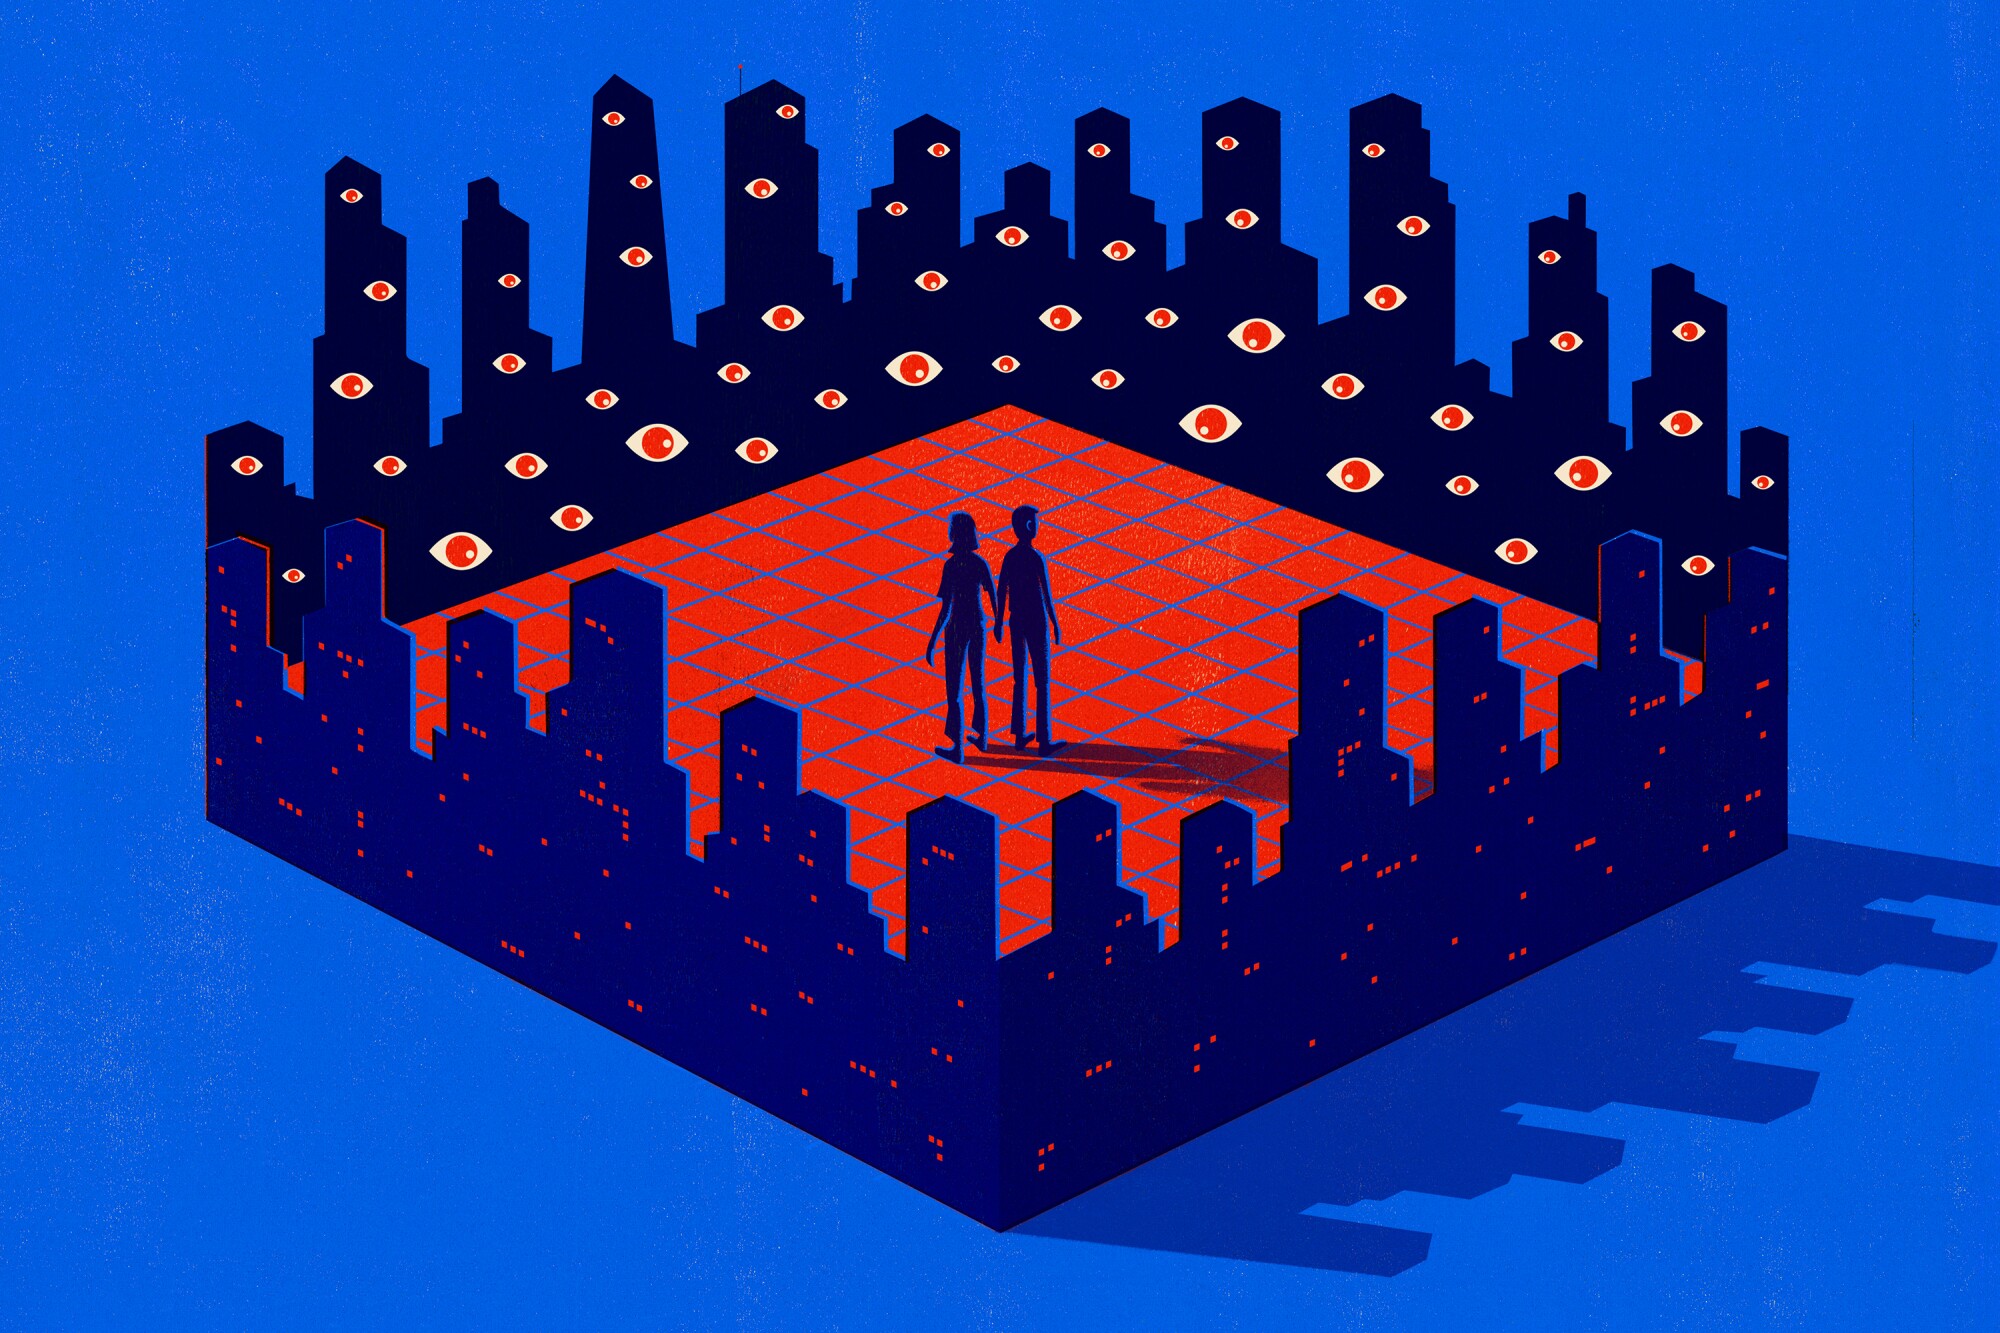 A stylized illustration of a couple inside a city with eyes all around them 